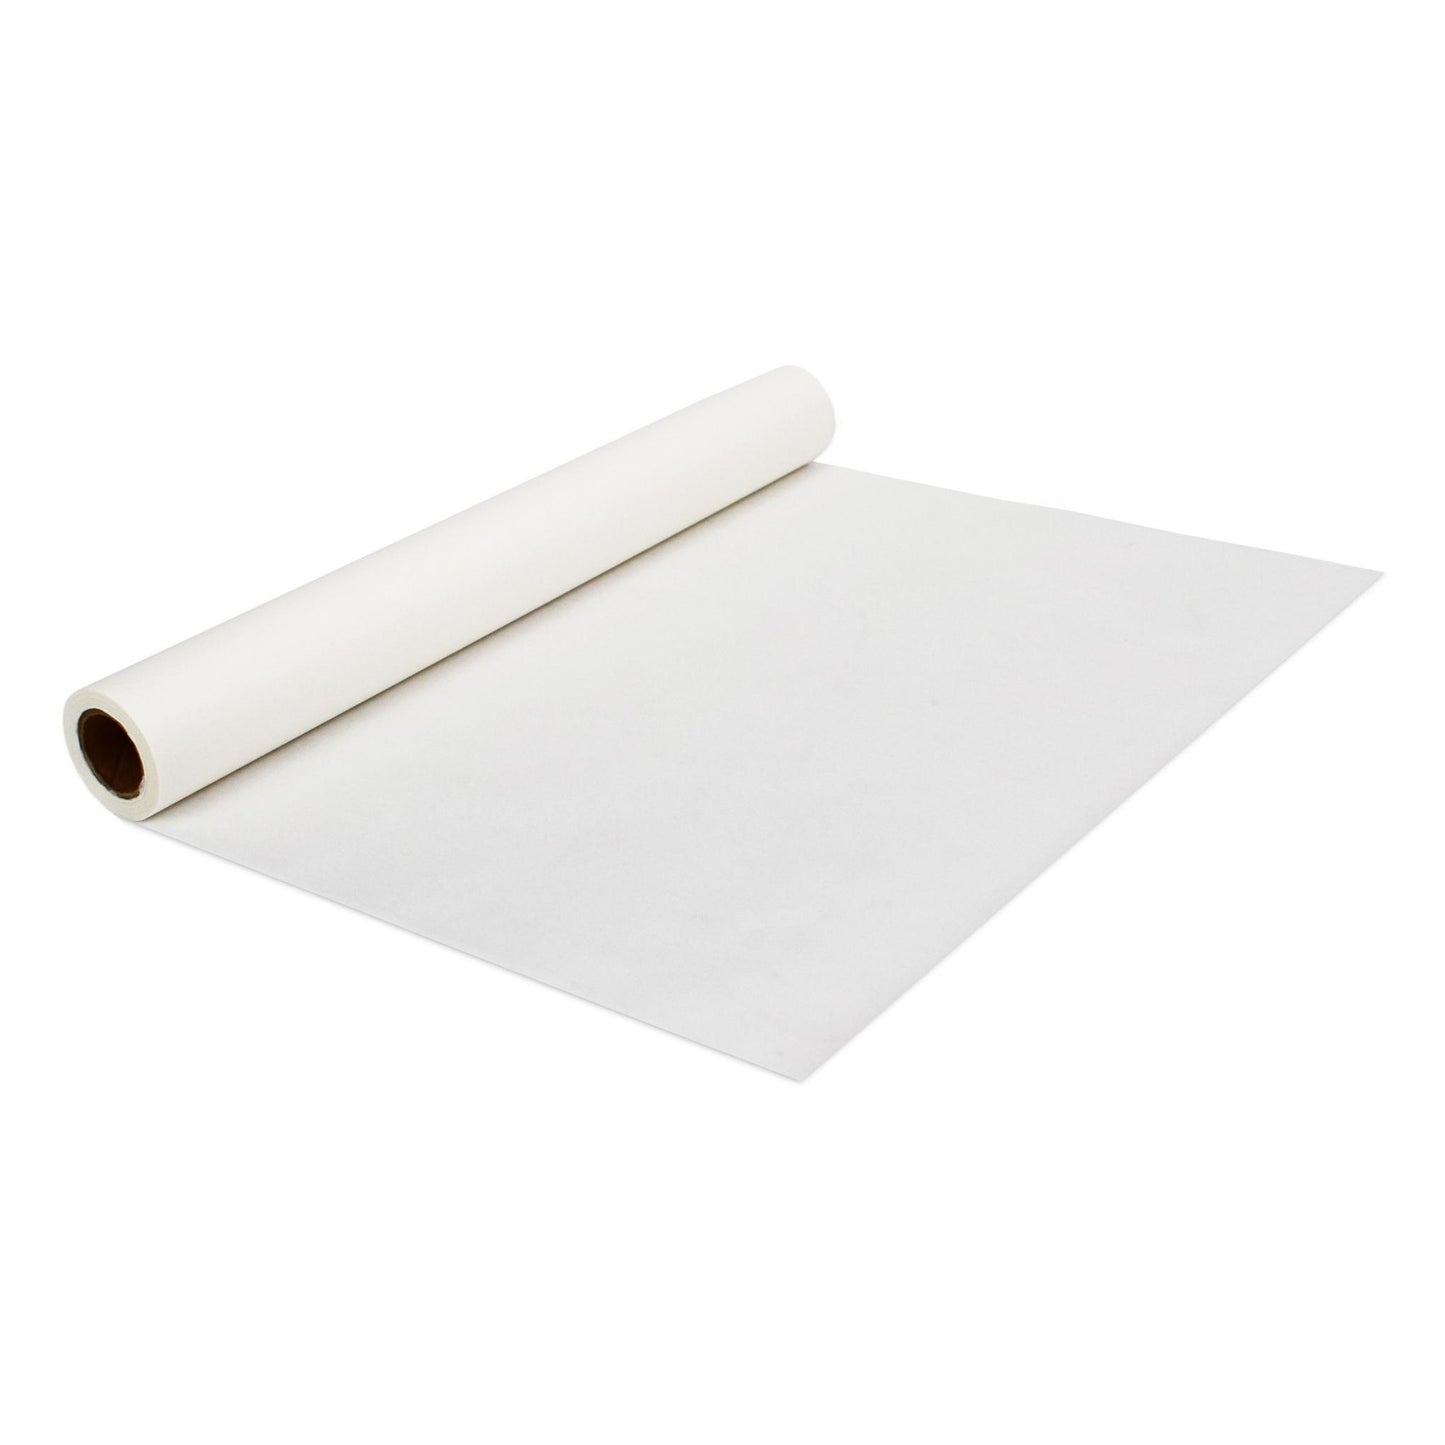 Tracing Paper Roll, 17In X 55Yards Tracing Paper White Trace Paper  Translucent Clear Tracing Paper for Drawing Pattern Paper,Drafting Paper  Sketching